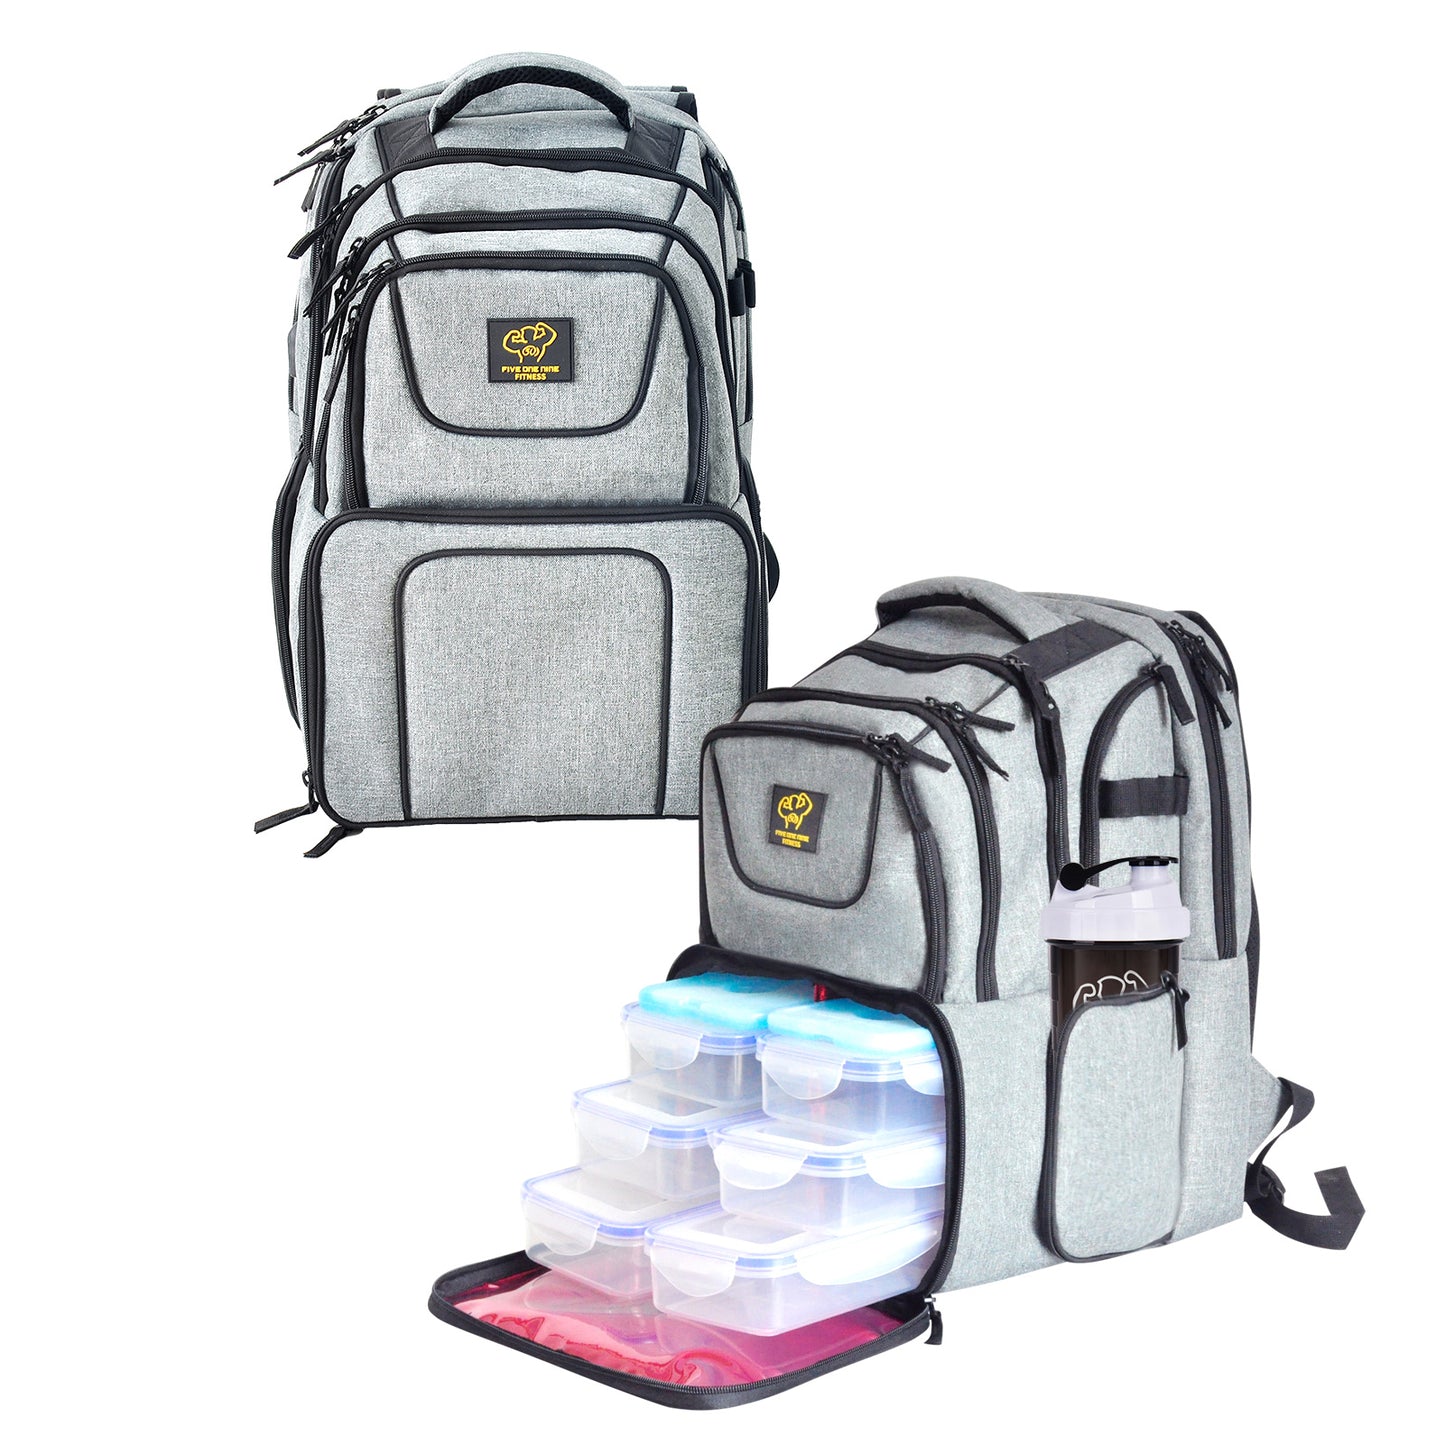 519 FITNESS CLASSIC LARGE BACKPACK MEAL PREP MANAGEMENT SYSTEM – 6 MEALS